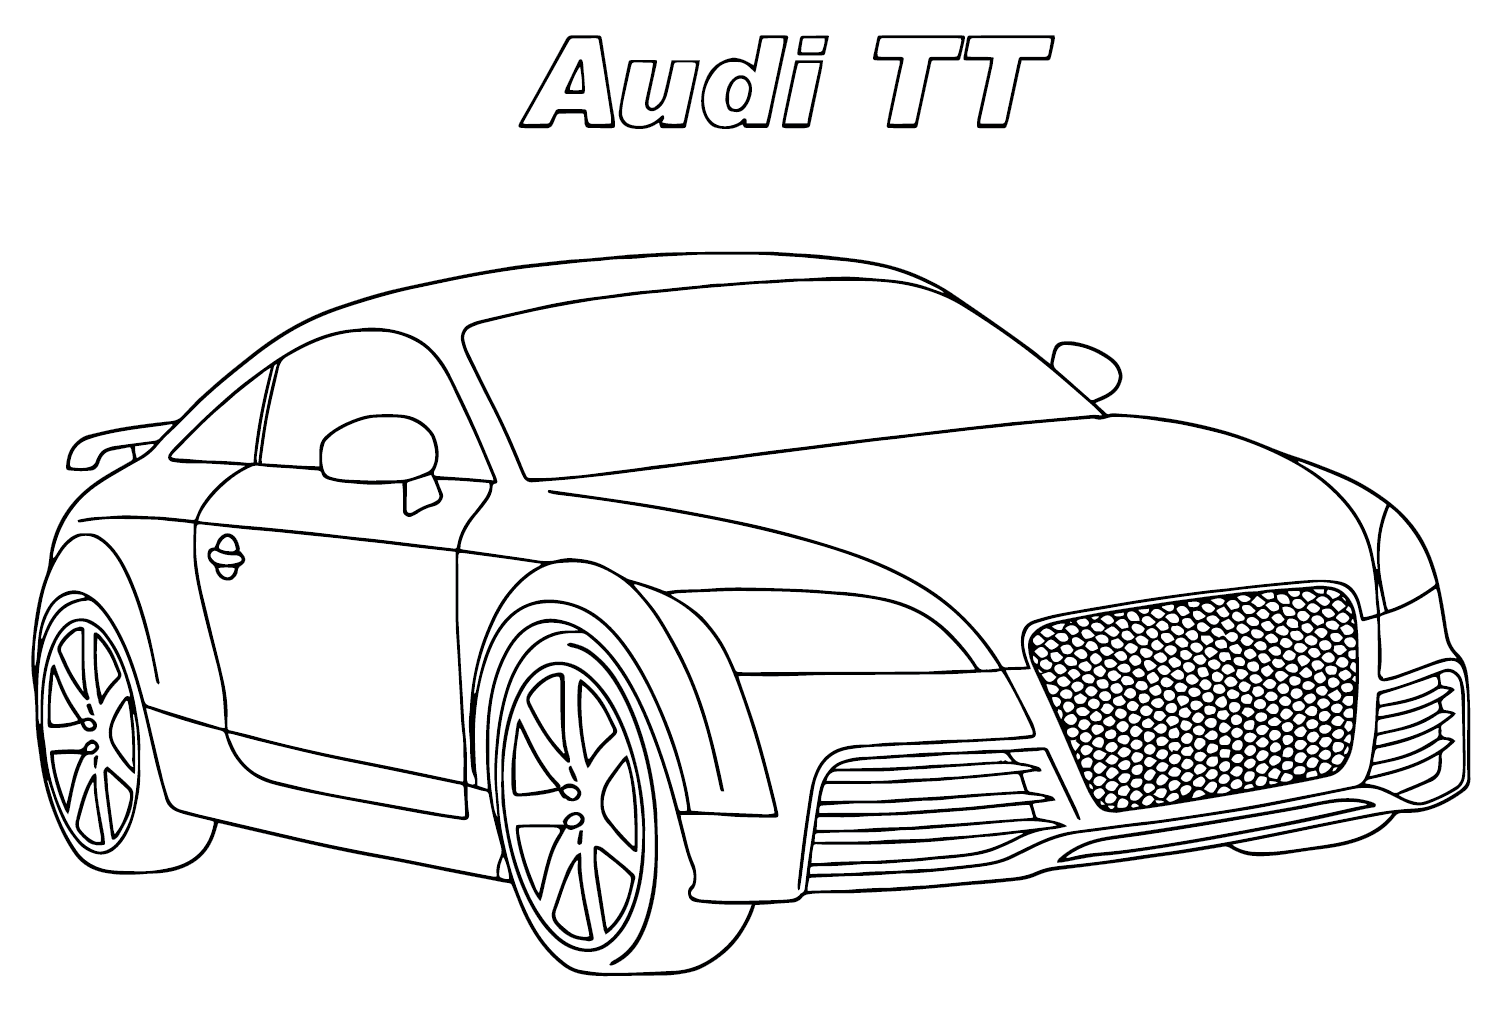 Audi TT Coloring Page from Audi